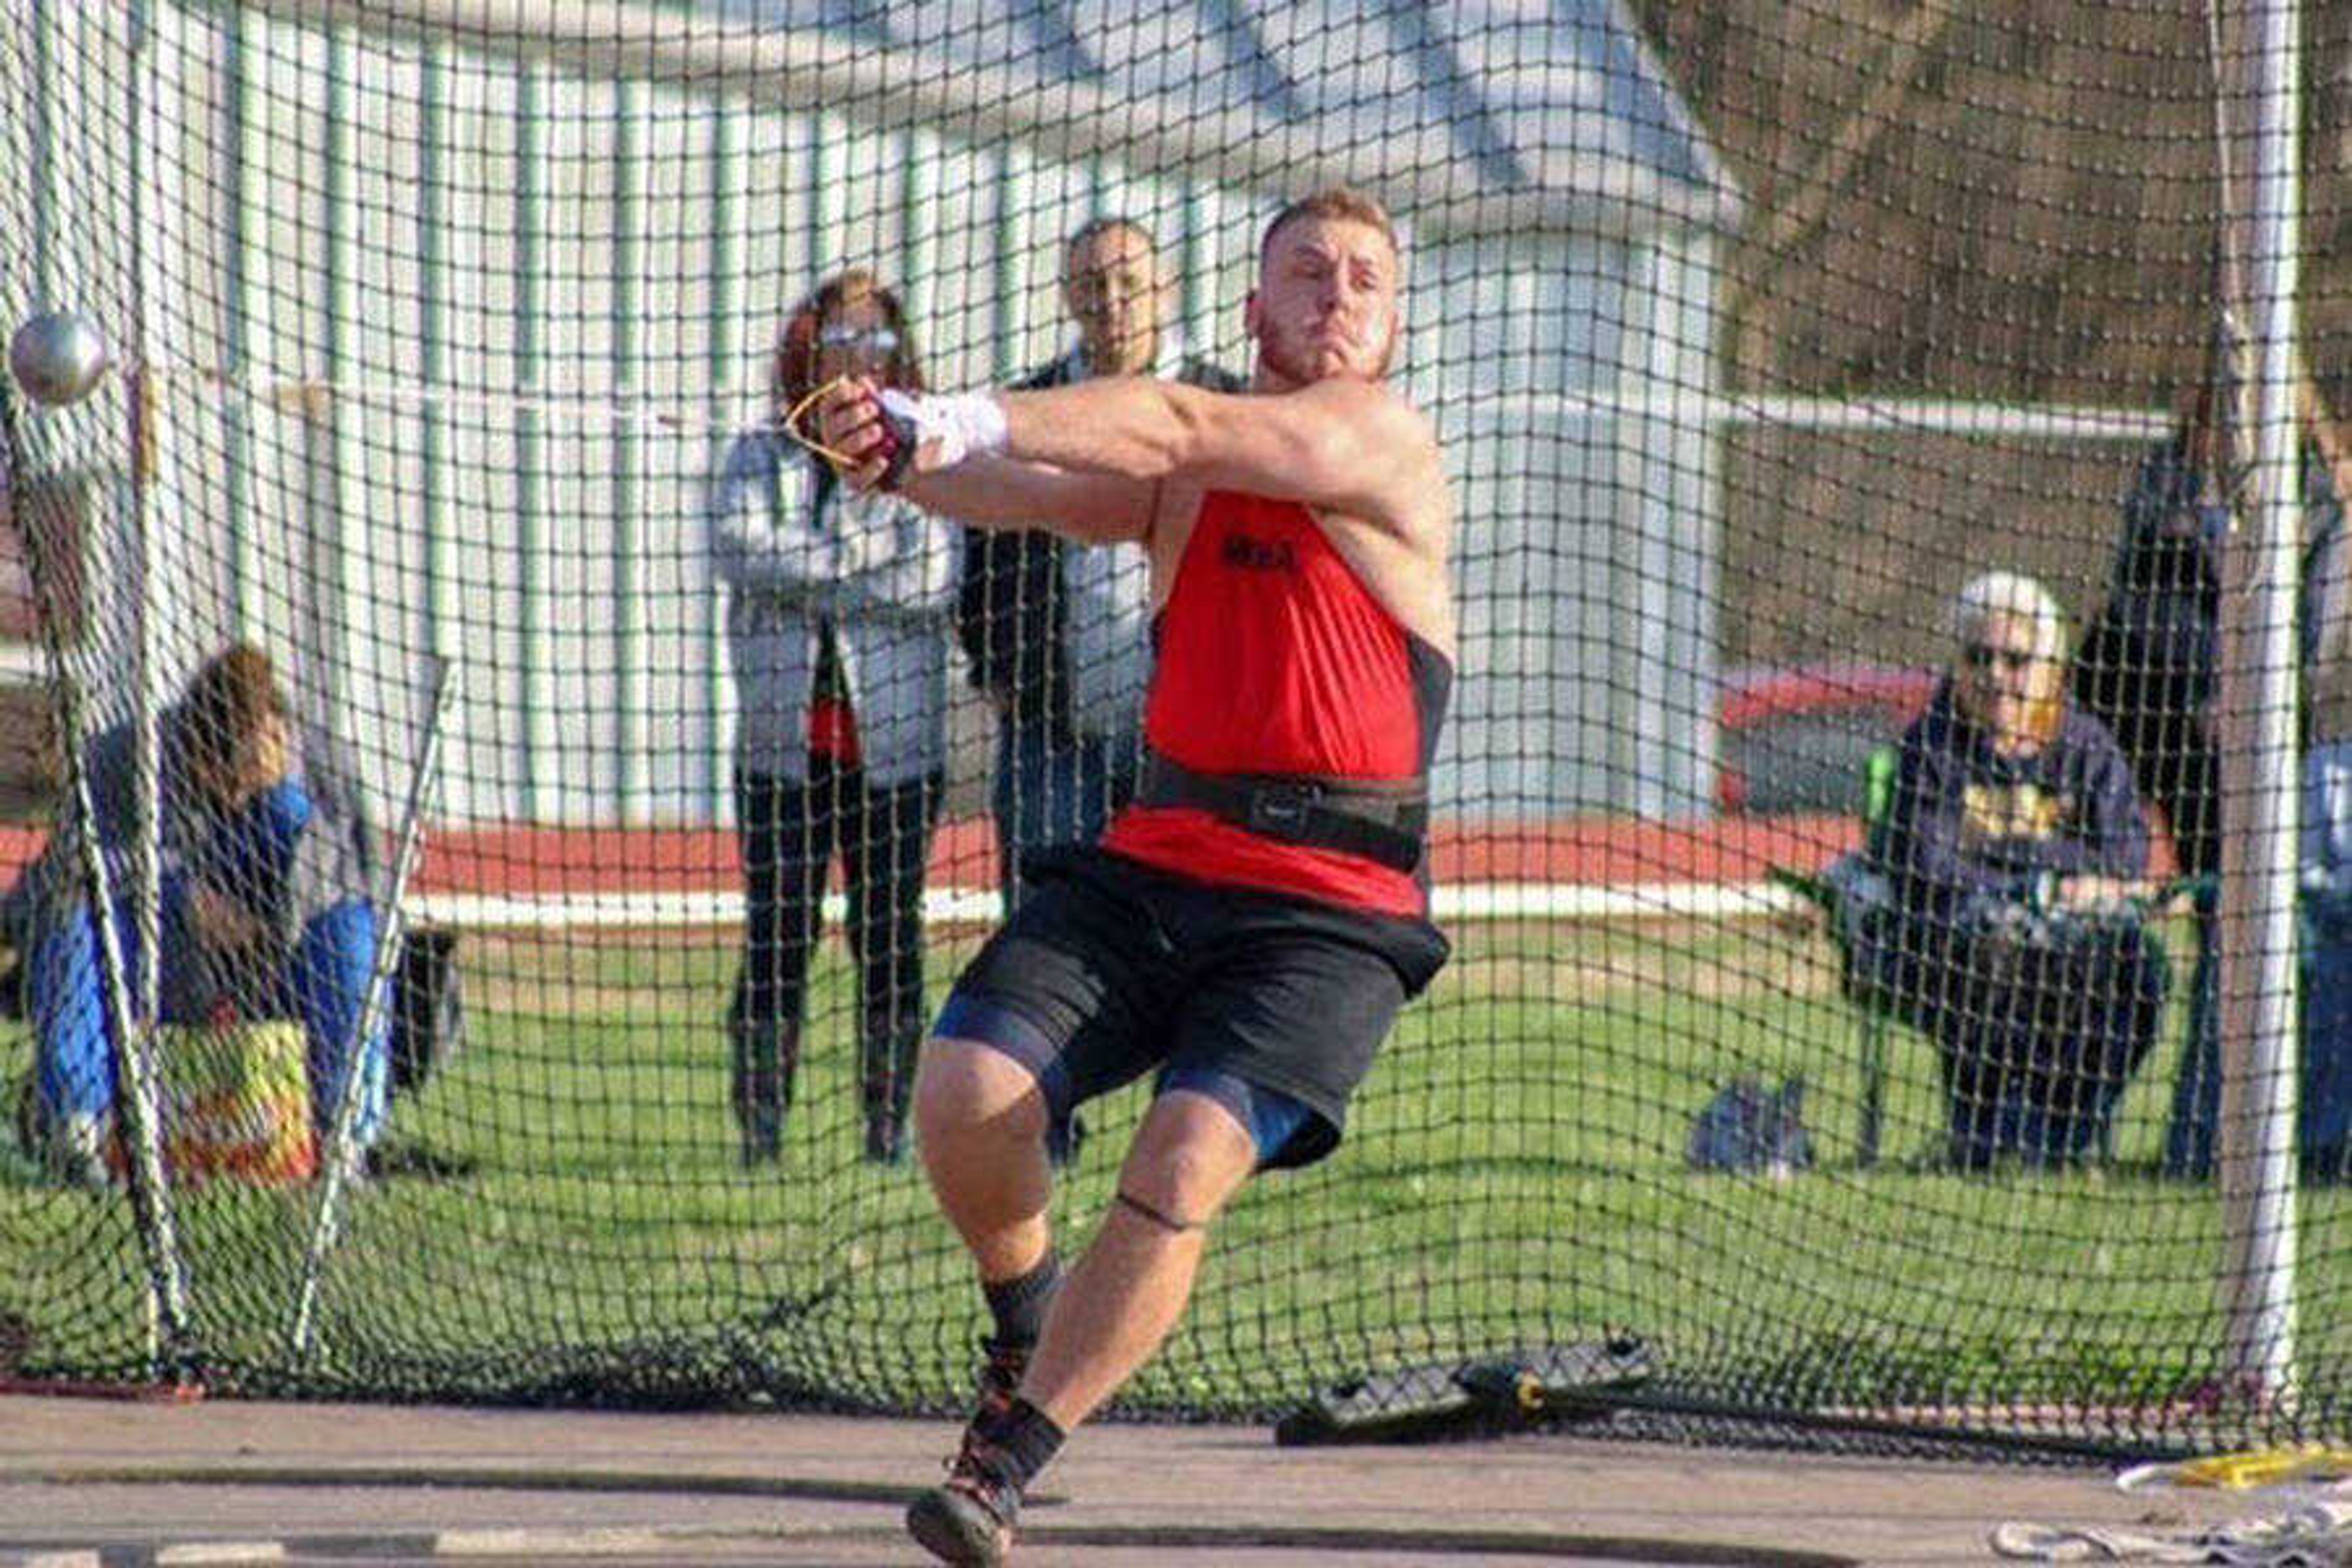 Logan Blomquist throws during a meet. Blomquist is currently training for the 2021 Olympic Trials.